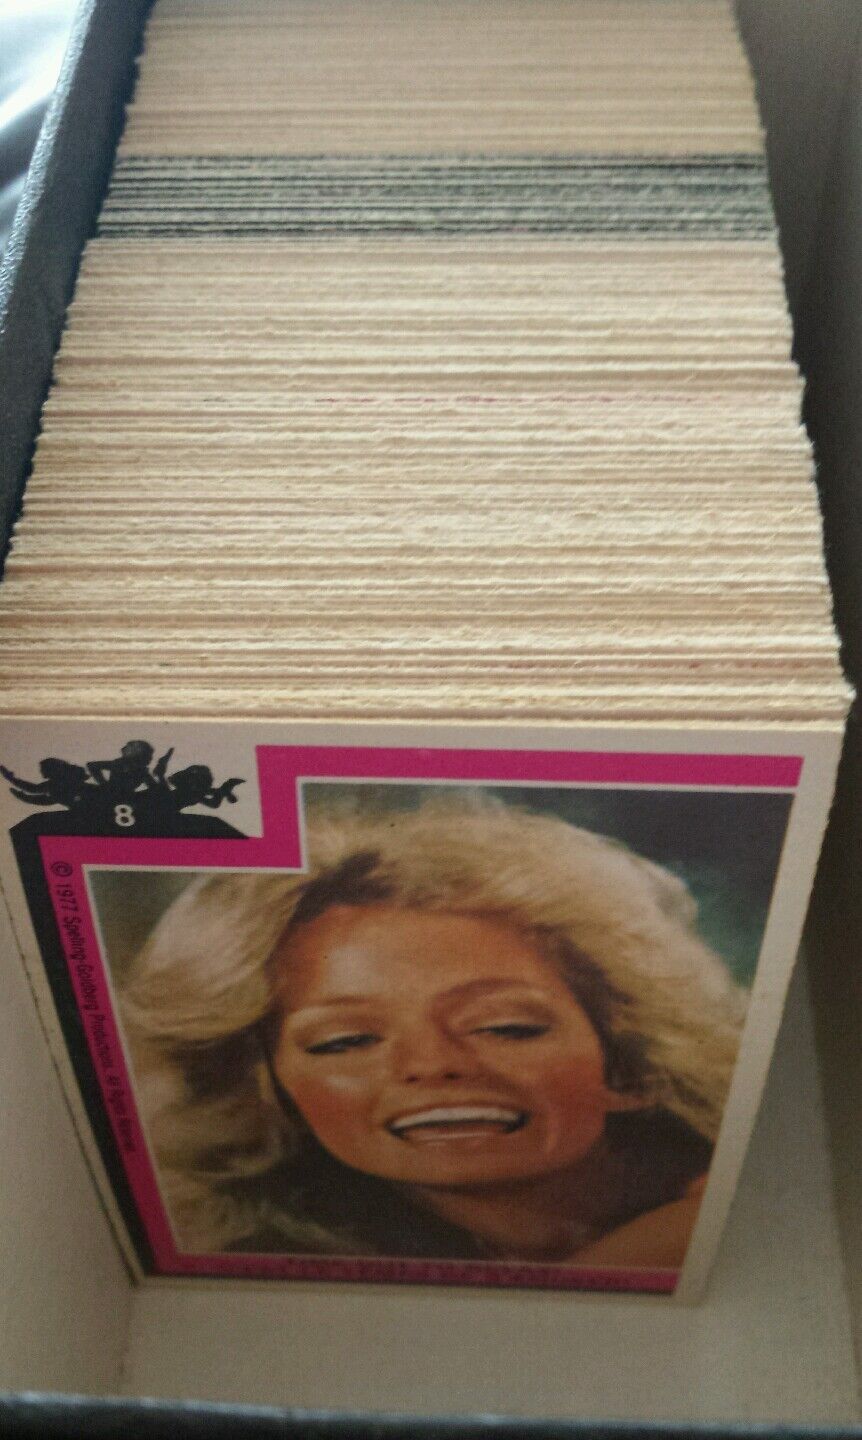 1977 O-Pee-Chee Charlie's Angels Series $2 each Ex or better complete your set